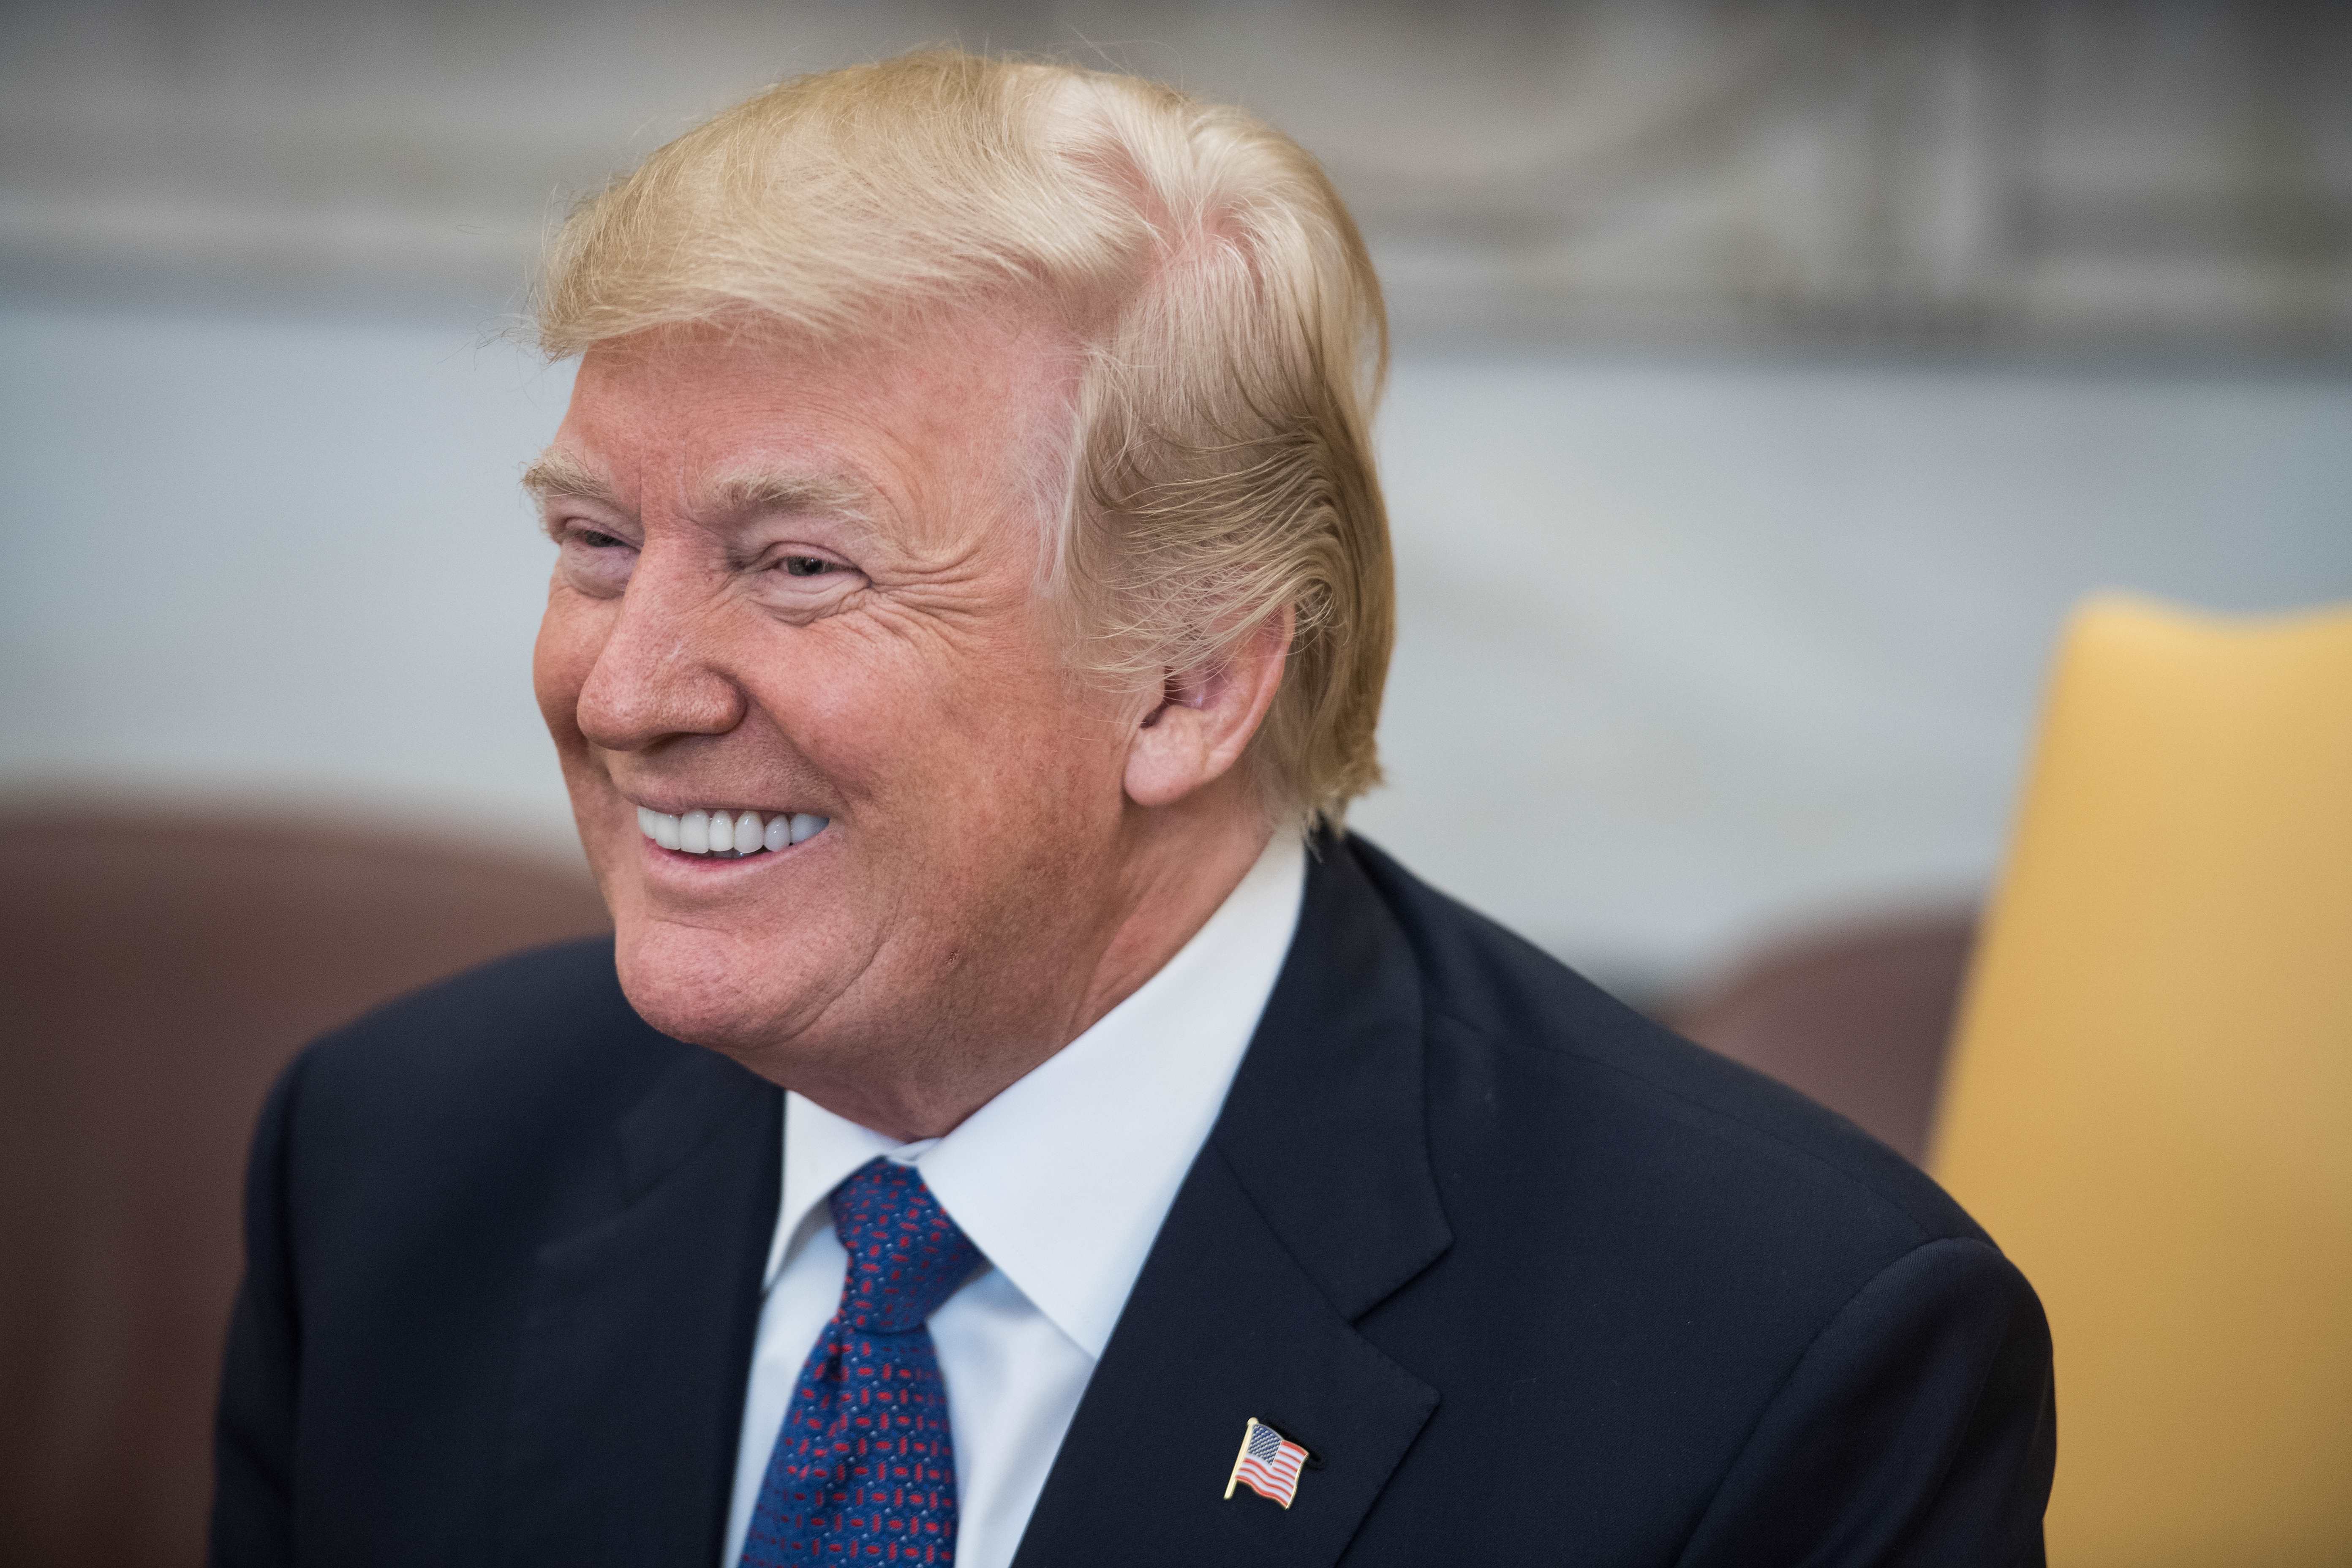 US President Donald Trump smiles during his meeting with his Kazakh counterpart Nursultan Nazarbayev in the Oval office at the White House in Washington, DC, on January 16, 2018 (NICHOLAS KAMM/AFP/Getty Images)